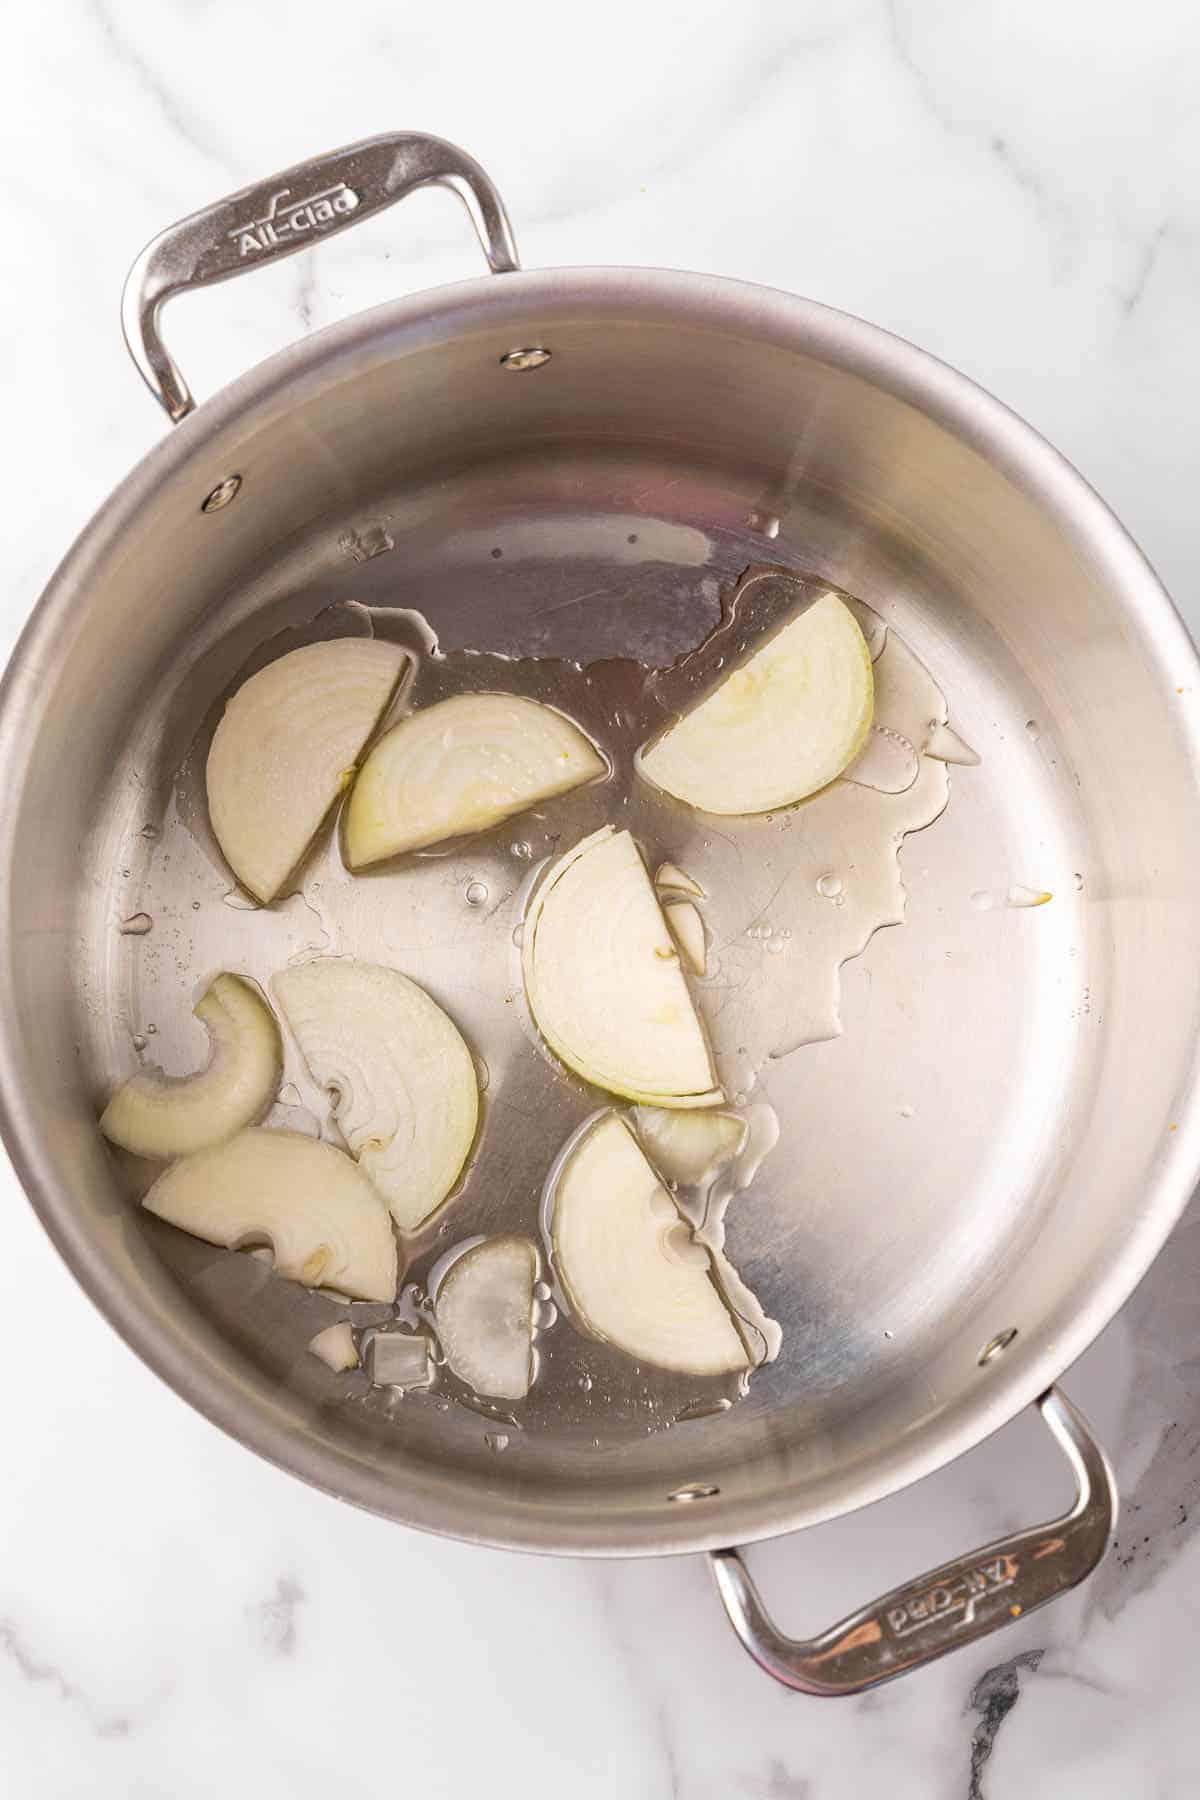 Onions and oil added to a silver saucepan, as seen from above on a white marble countertop